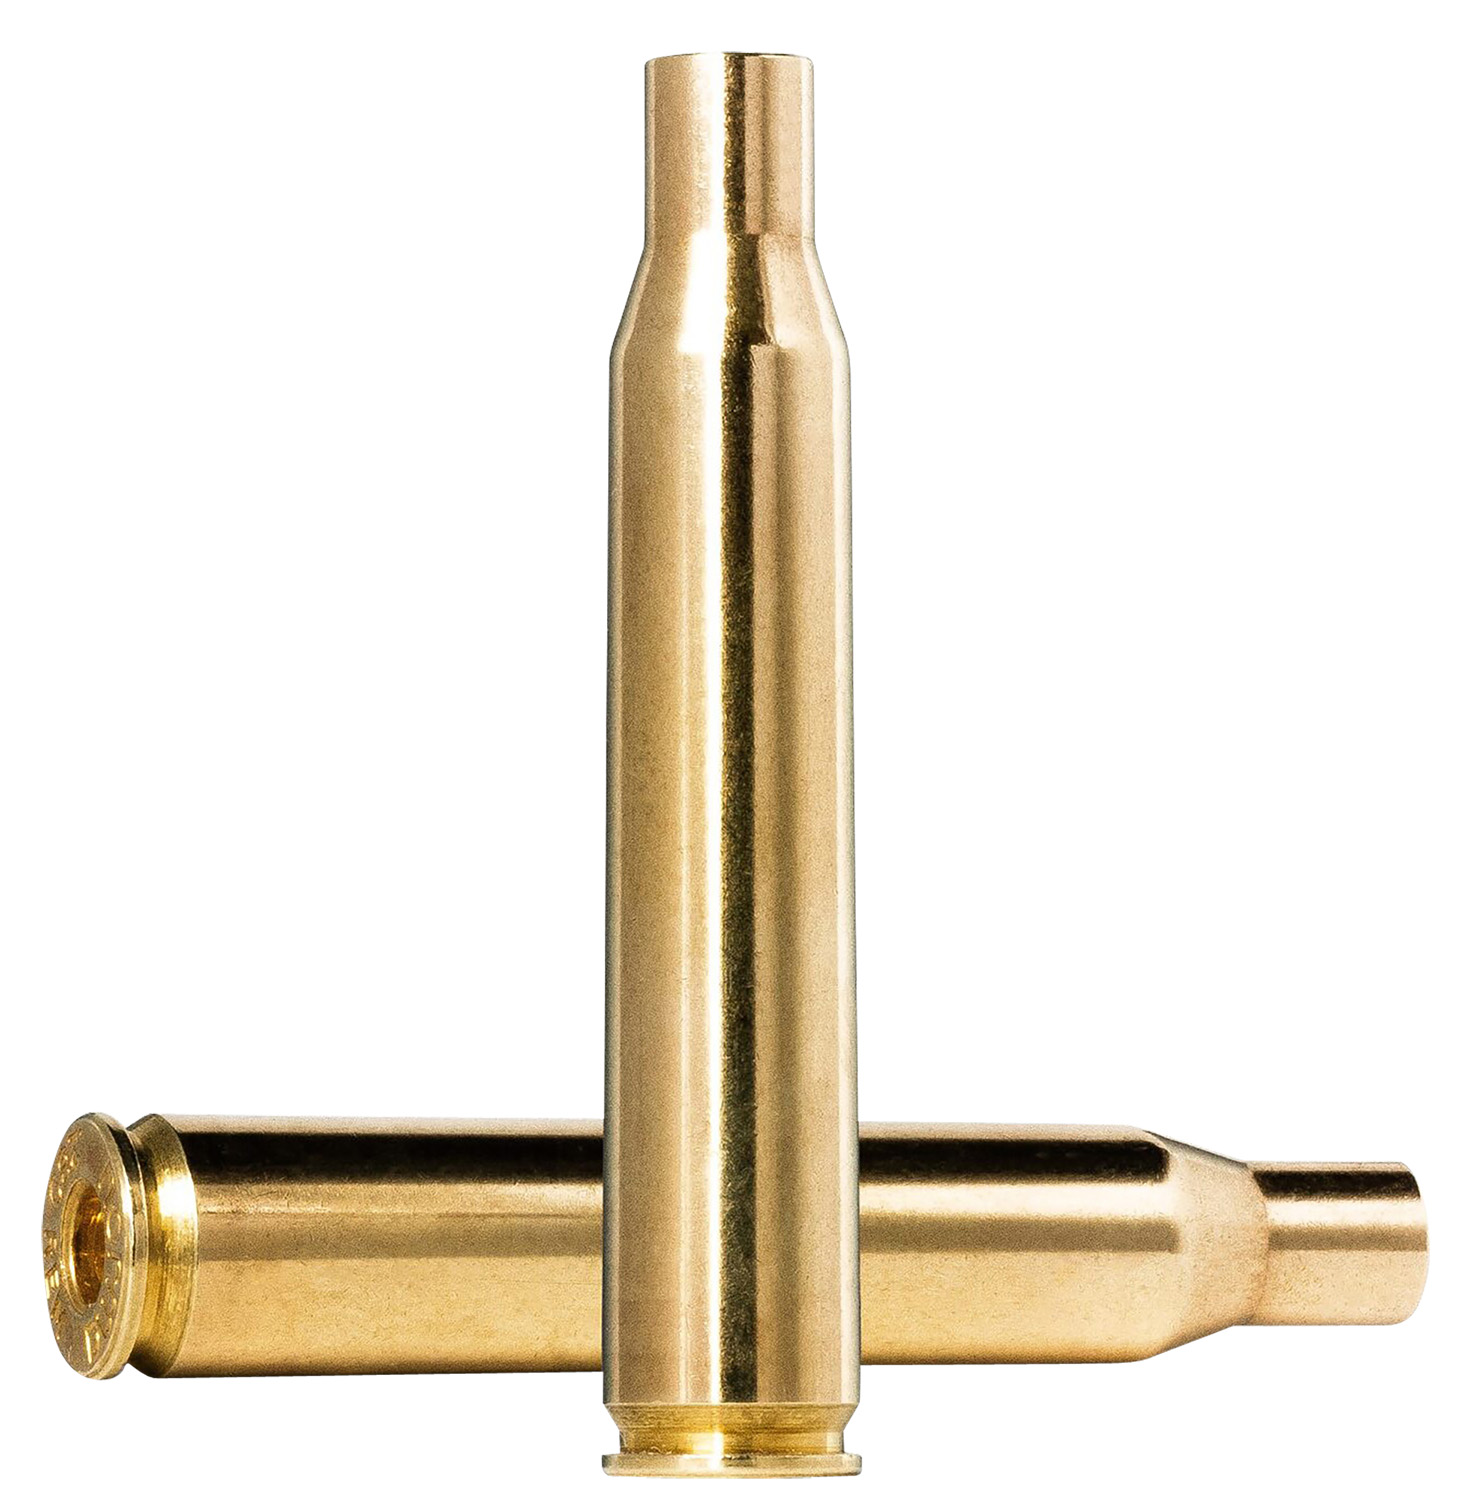 Norma Ammunition 20270017 Dedicated Components Reloading 7x57mm Rifle Brass